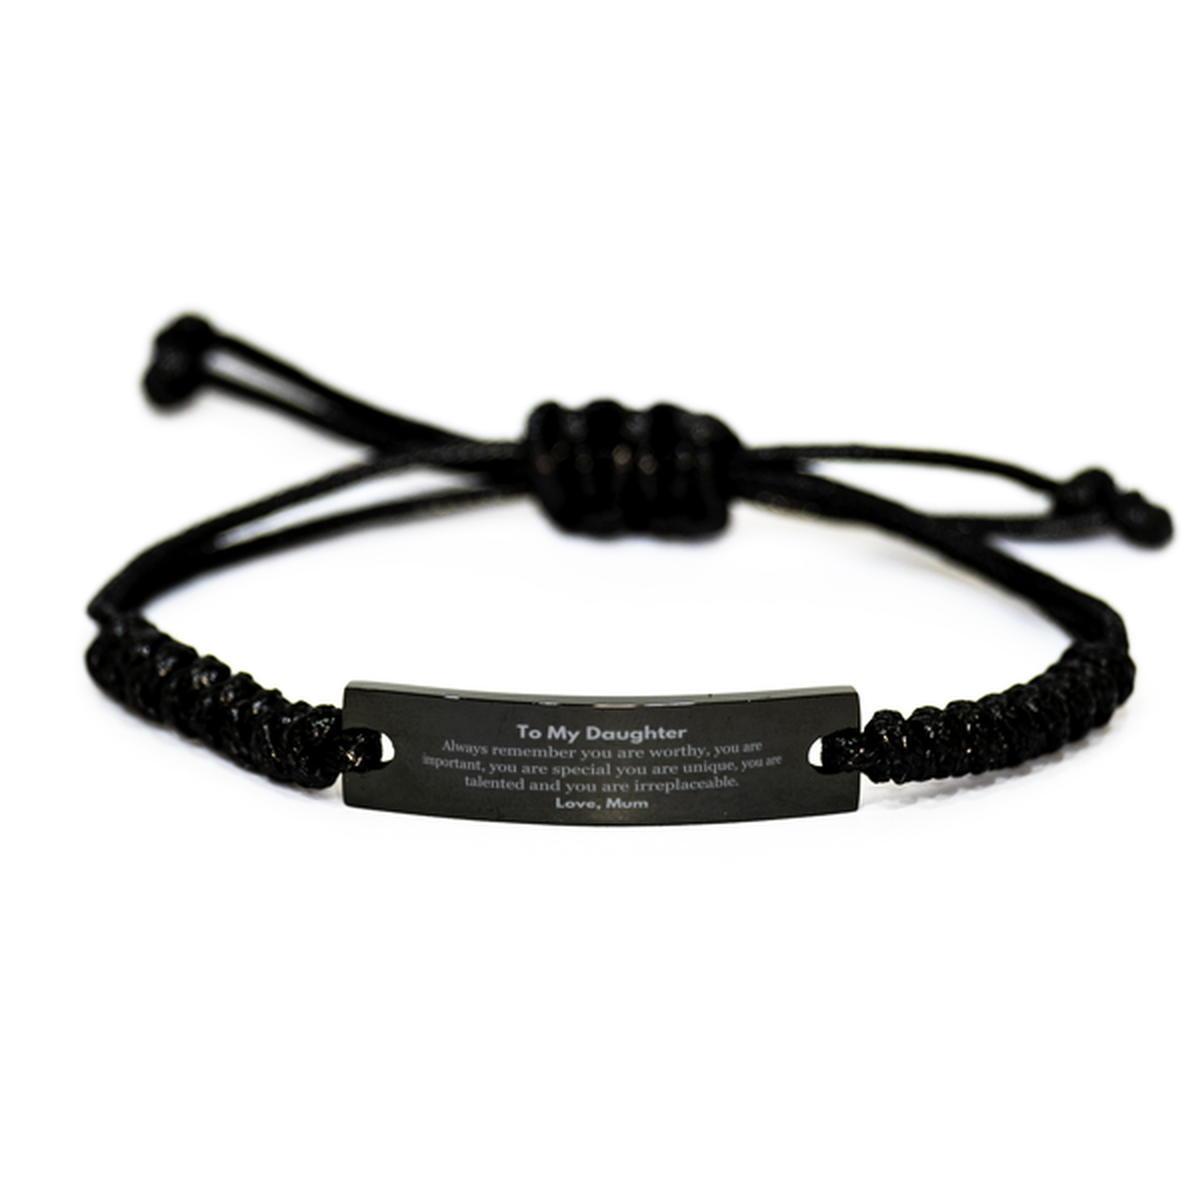 Daughter Birthday Gifts from Mum, Inspirational Black Rope Bracelet for Daughter Christmas Graduation Gifts for Daughter Always remember you are worthy, you are important. Love, Mum